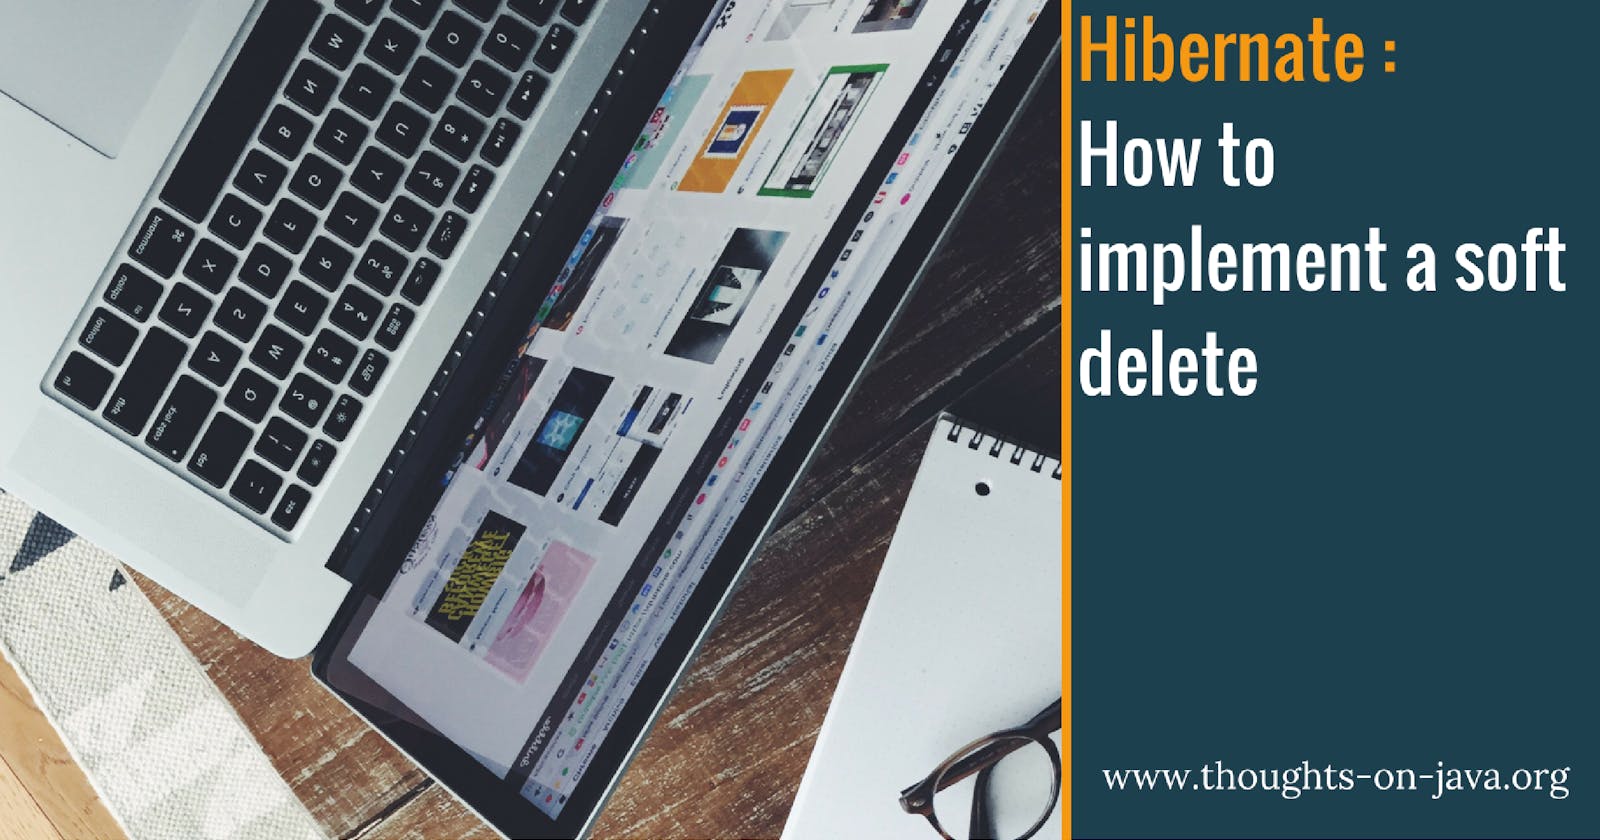 How to implement a soft delete with Hibernate